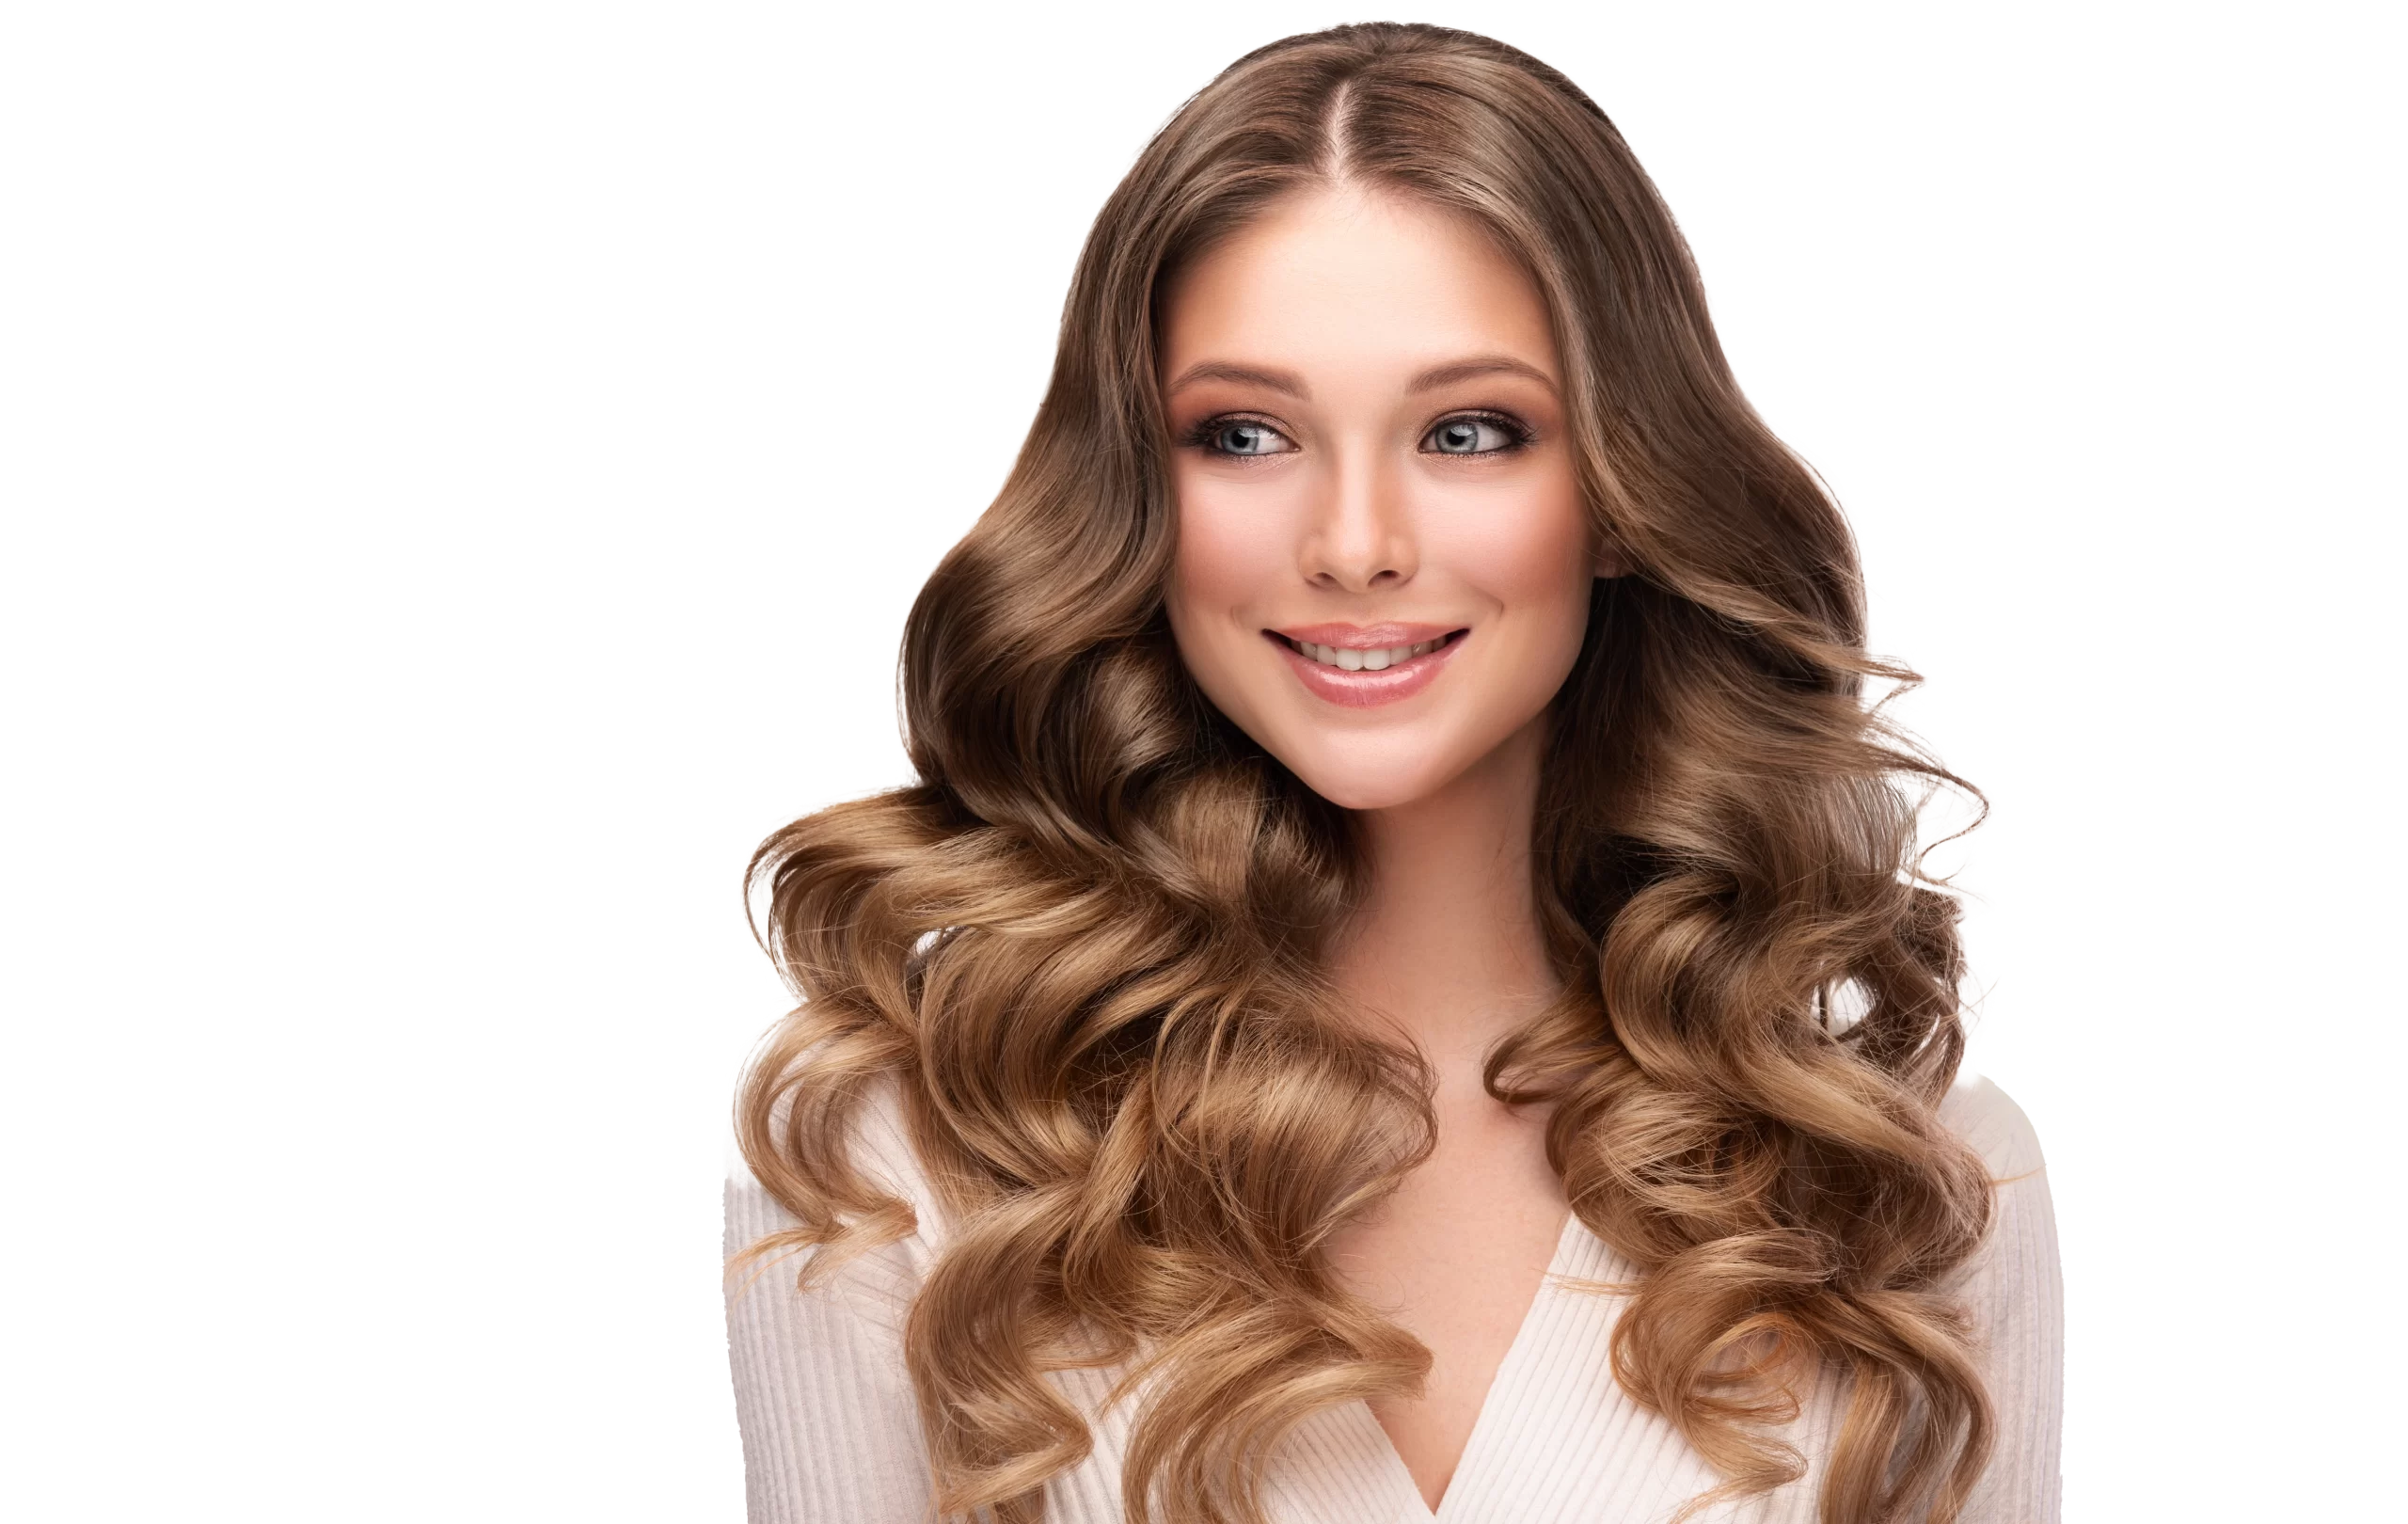 portrait-deep-blonde-haired-woman-with-elegant-wavy-long-hairstyle-wearing-exquisite-makeup